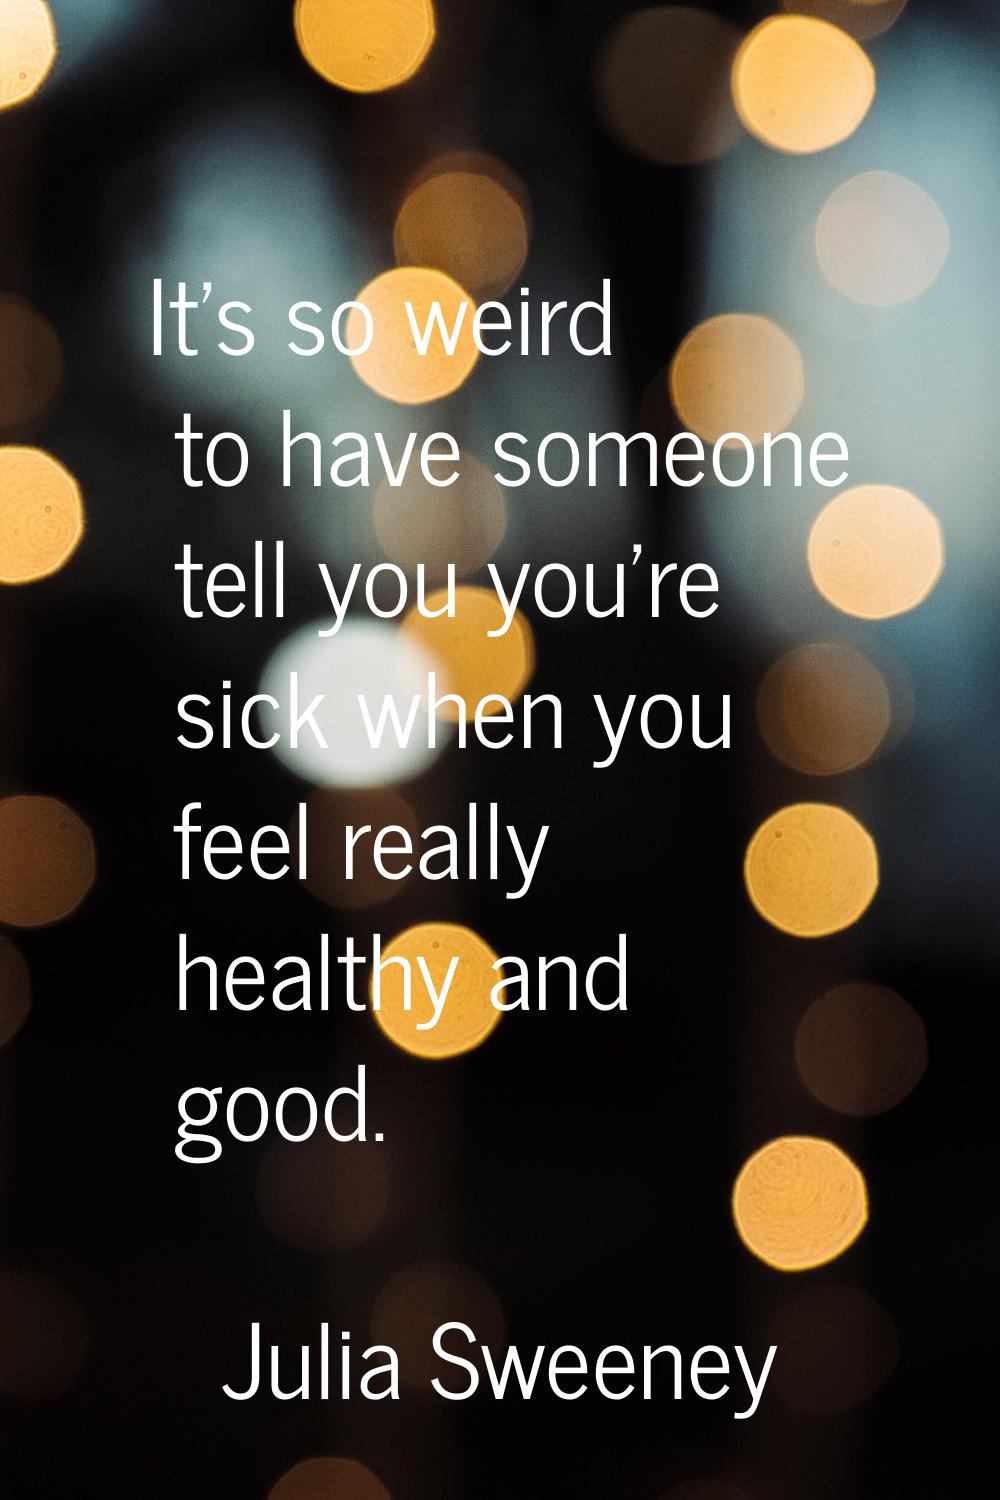 It's so weird to have someone tell you you're sick when you feel really healthy and good.